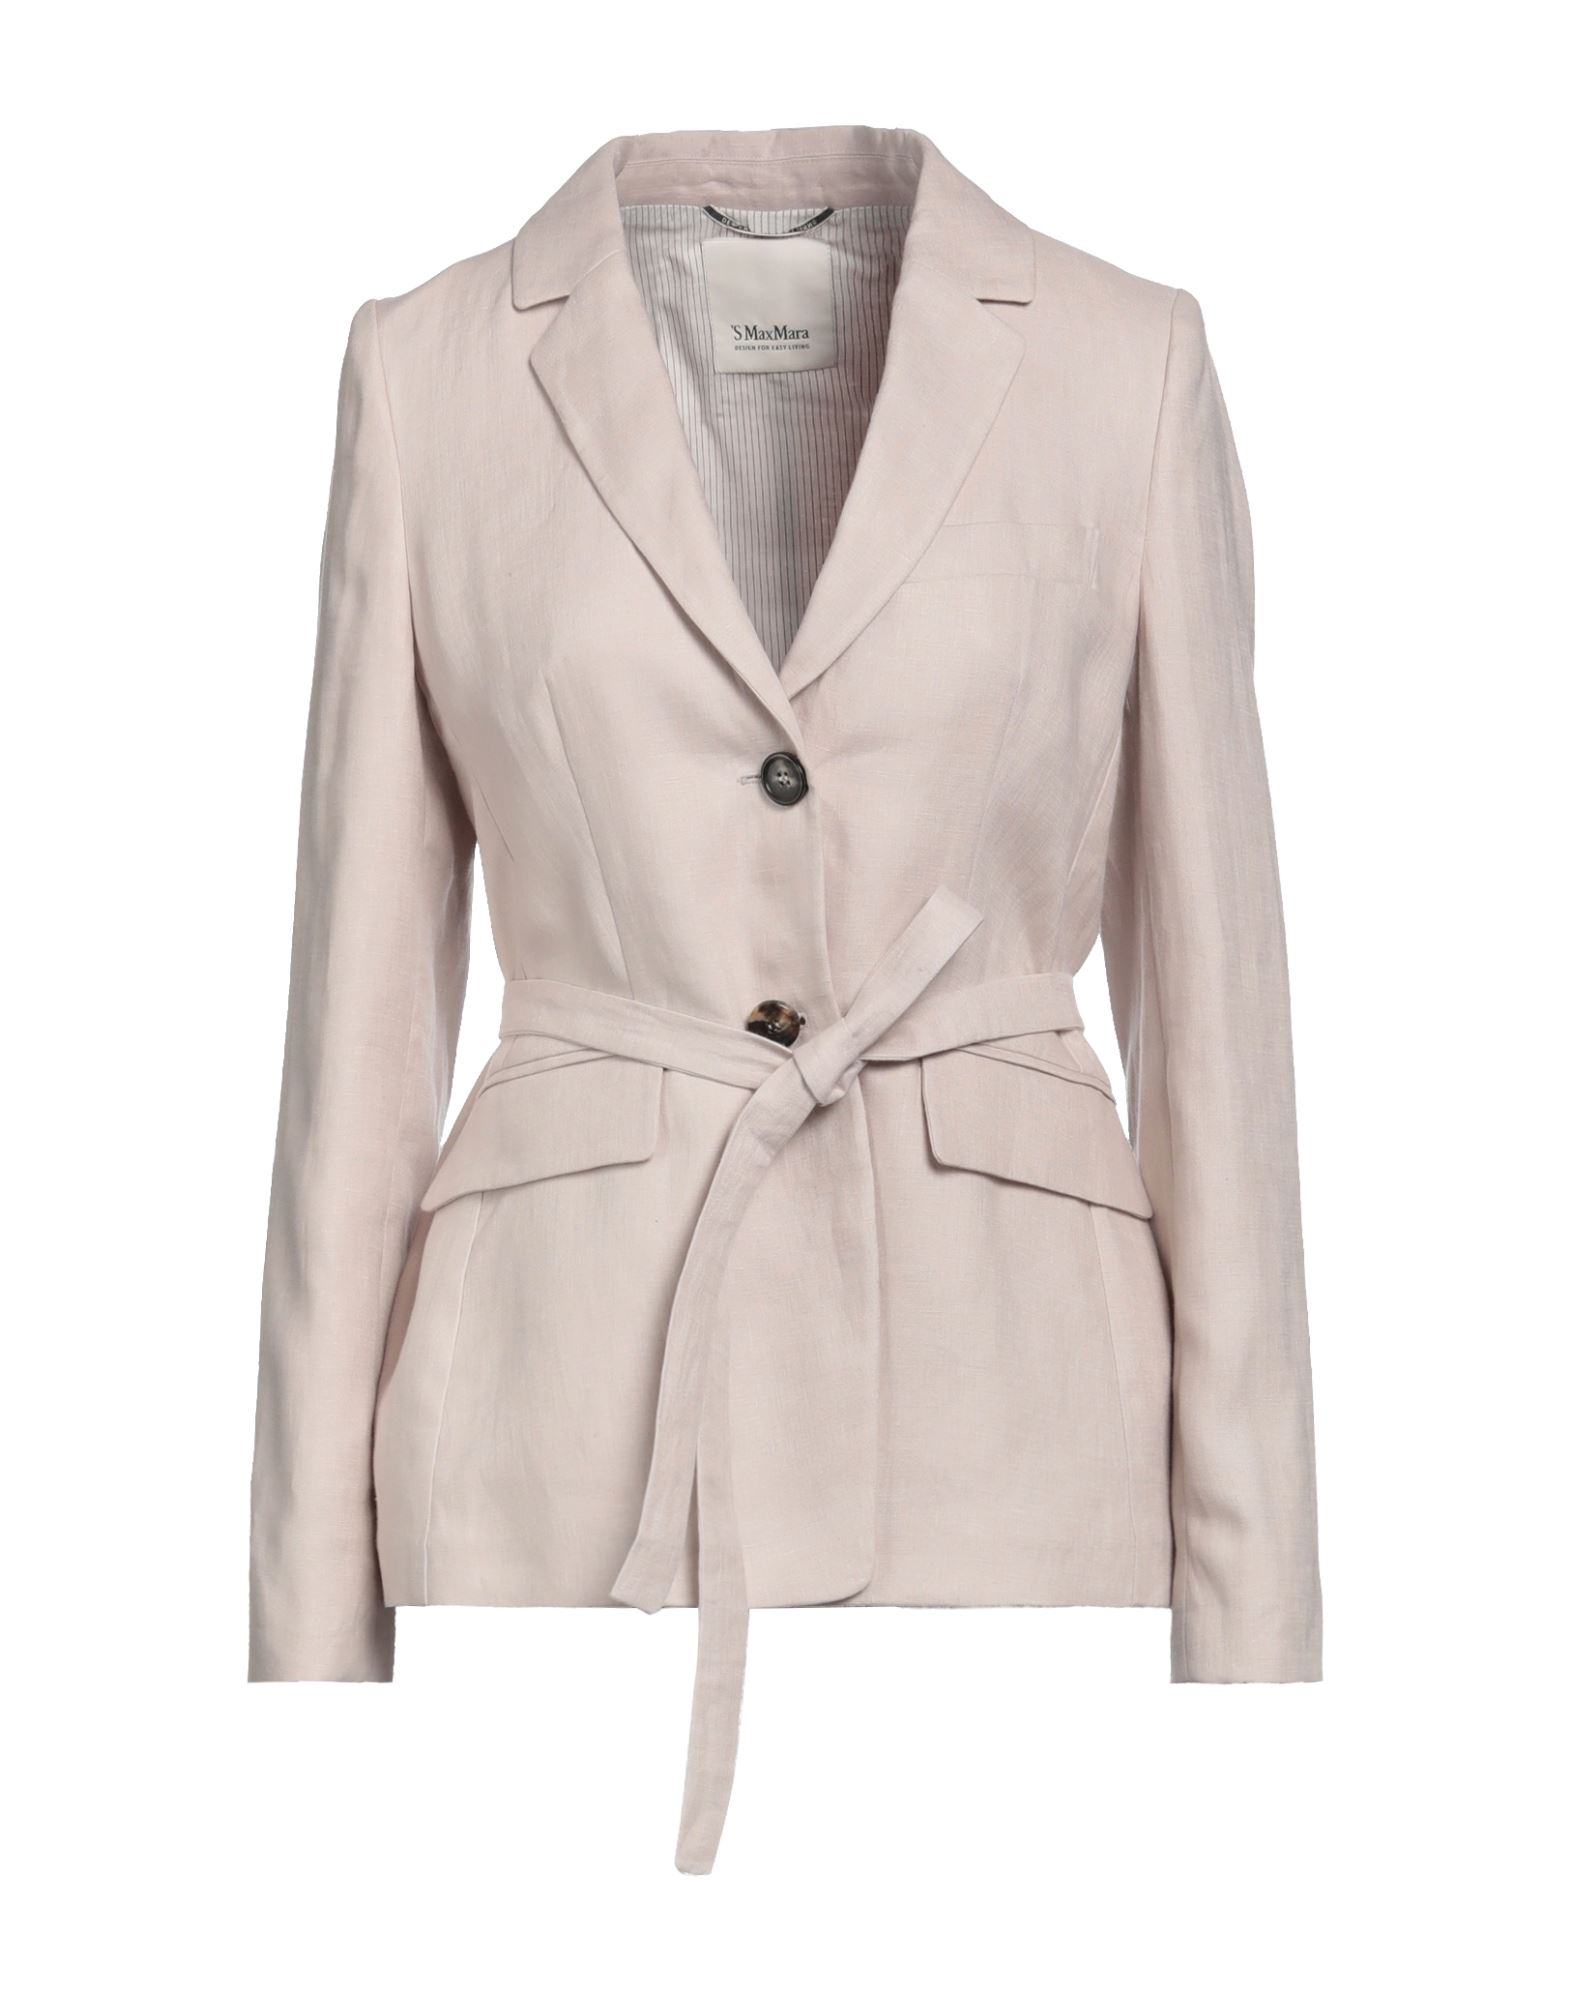 's Max Mara Woman Suit Jacket Blush Size 6 Linen, Cotton In Pink